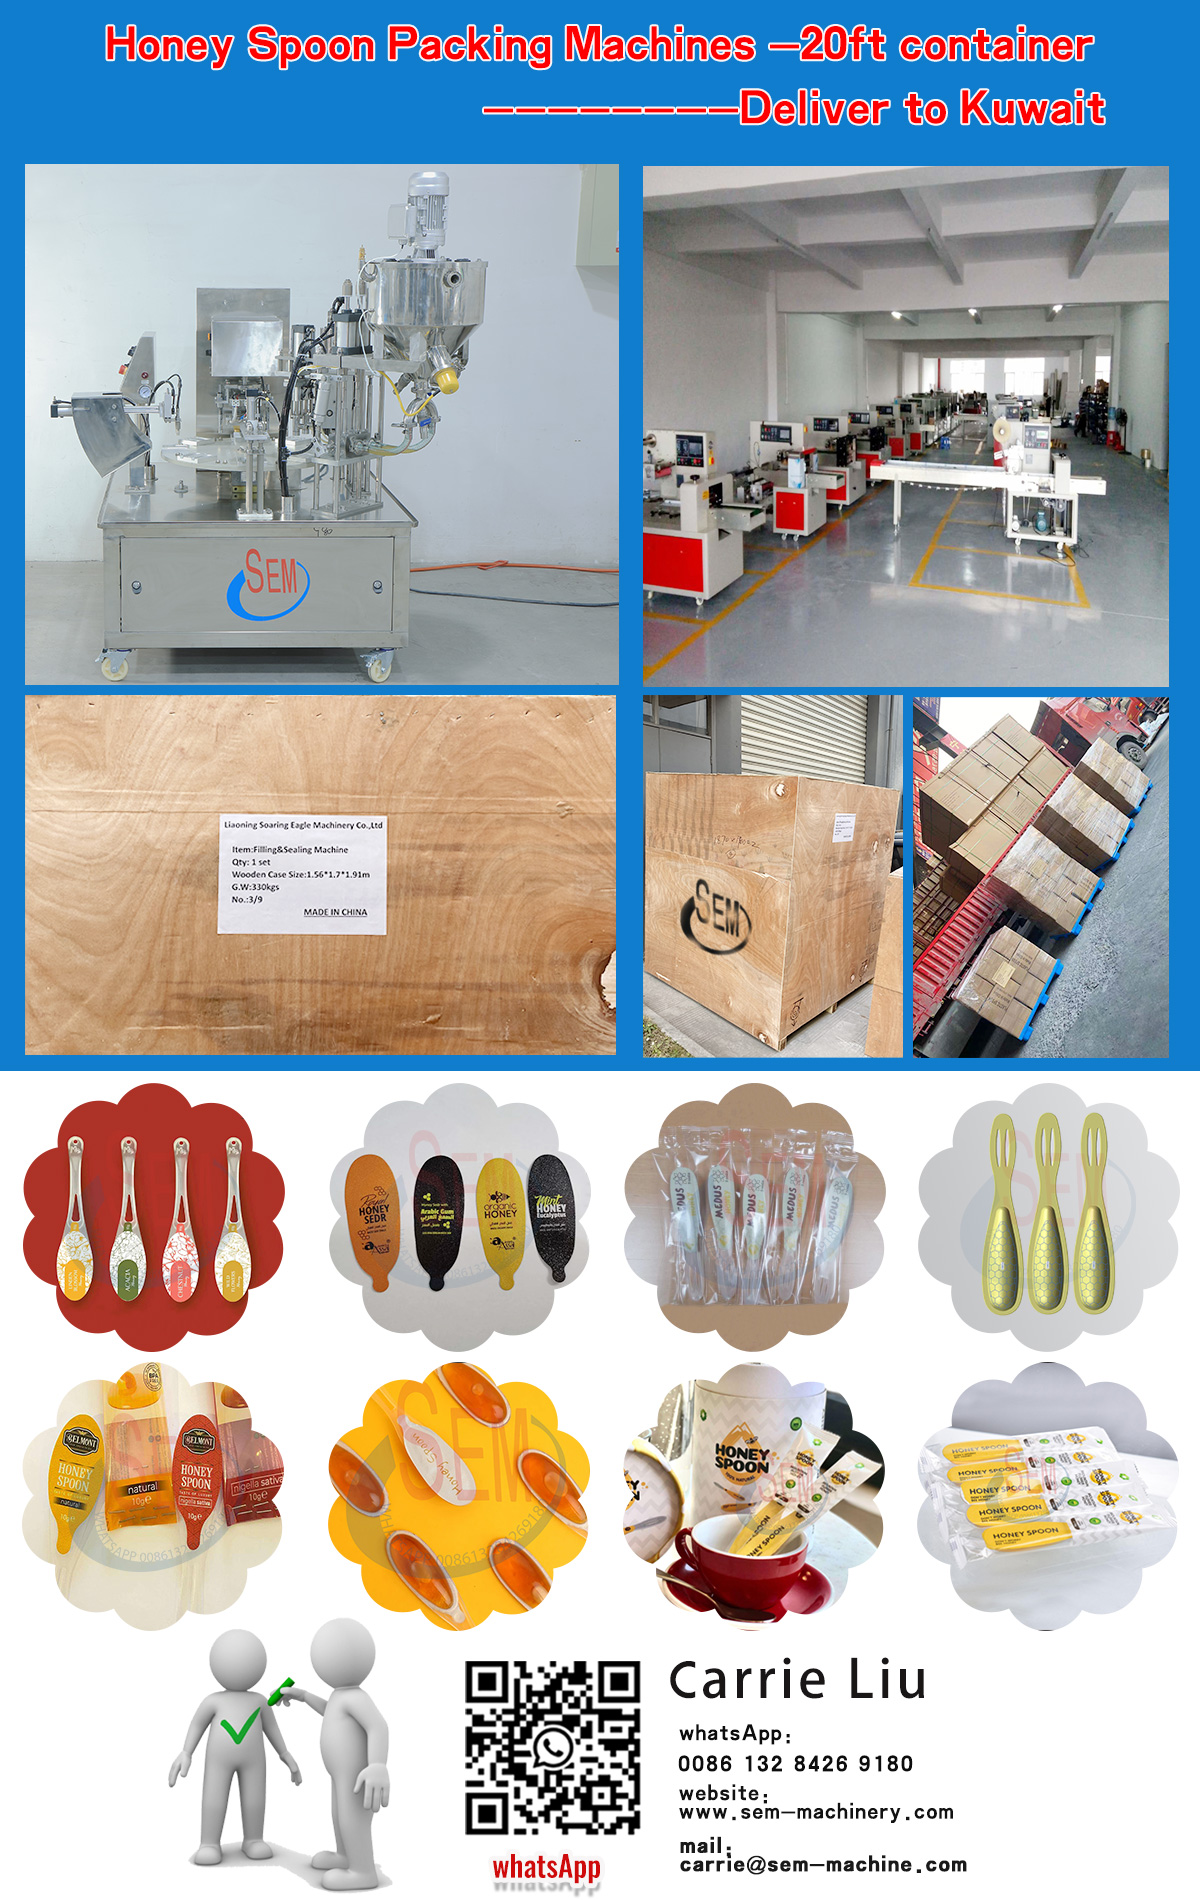 Automatic honey spoon packing machine 20 ft container——delivered to Kuwait